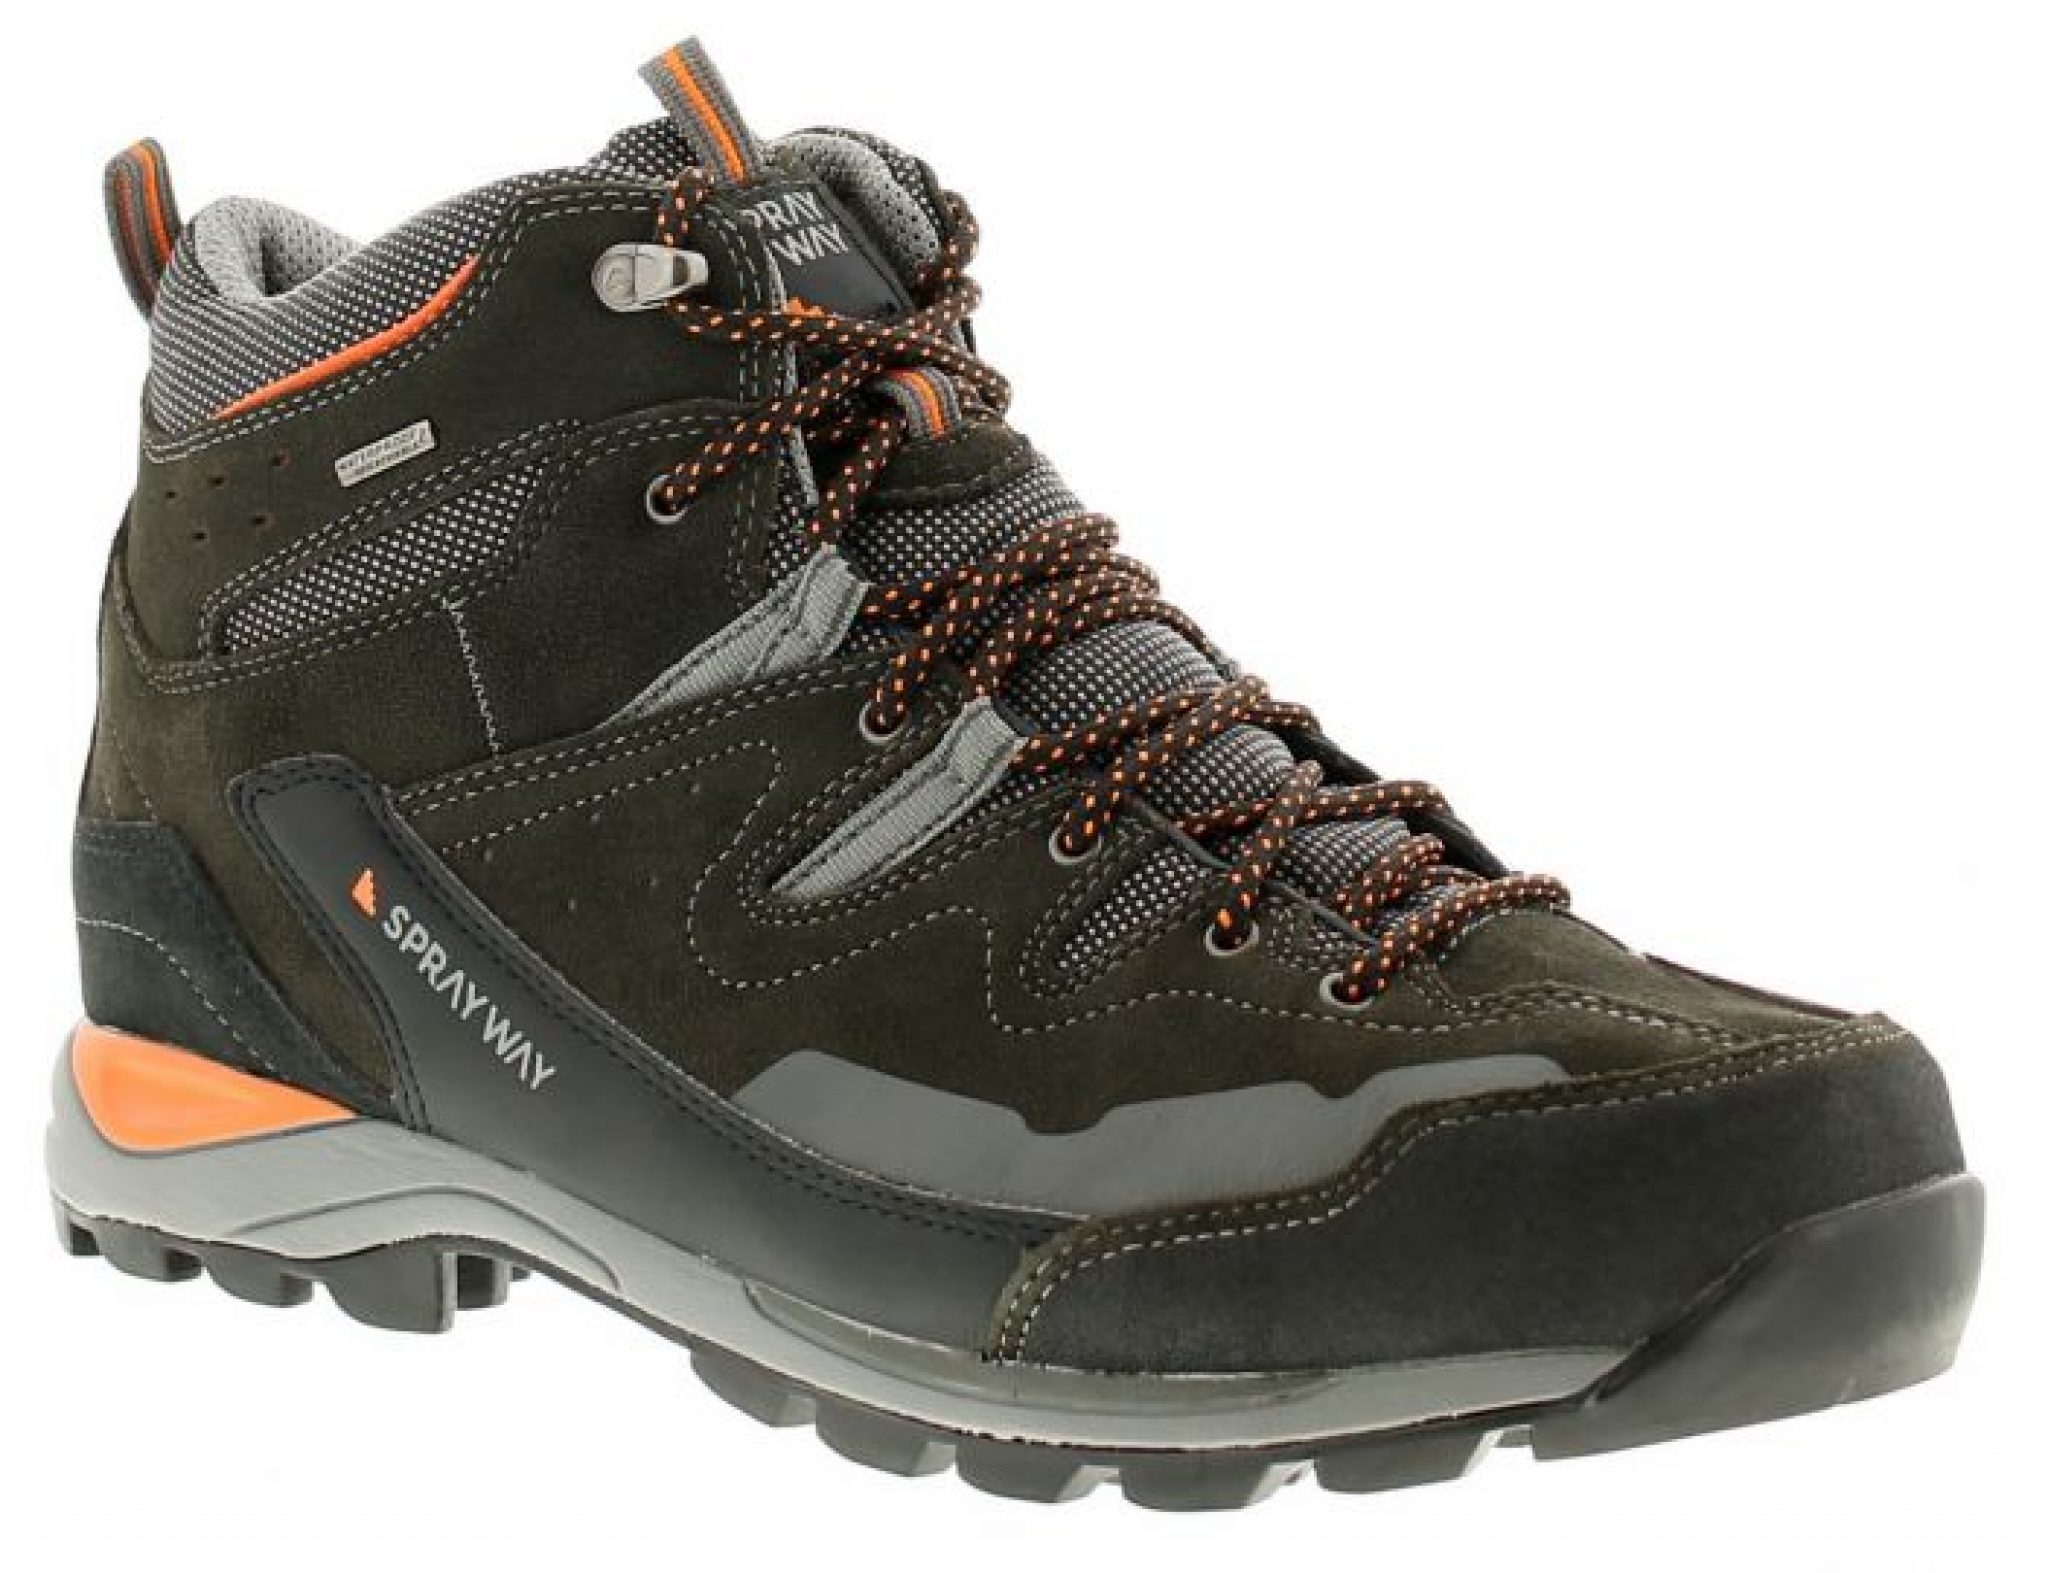 Best Waterproof Walking Boots Top Rated Durable Boots for Any Trail